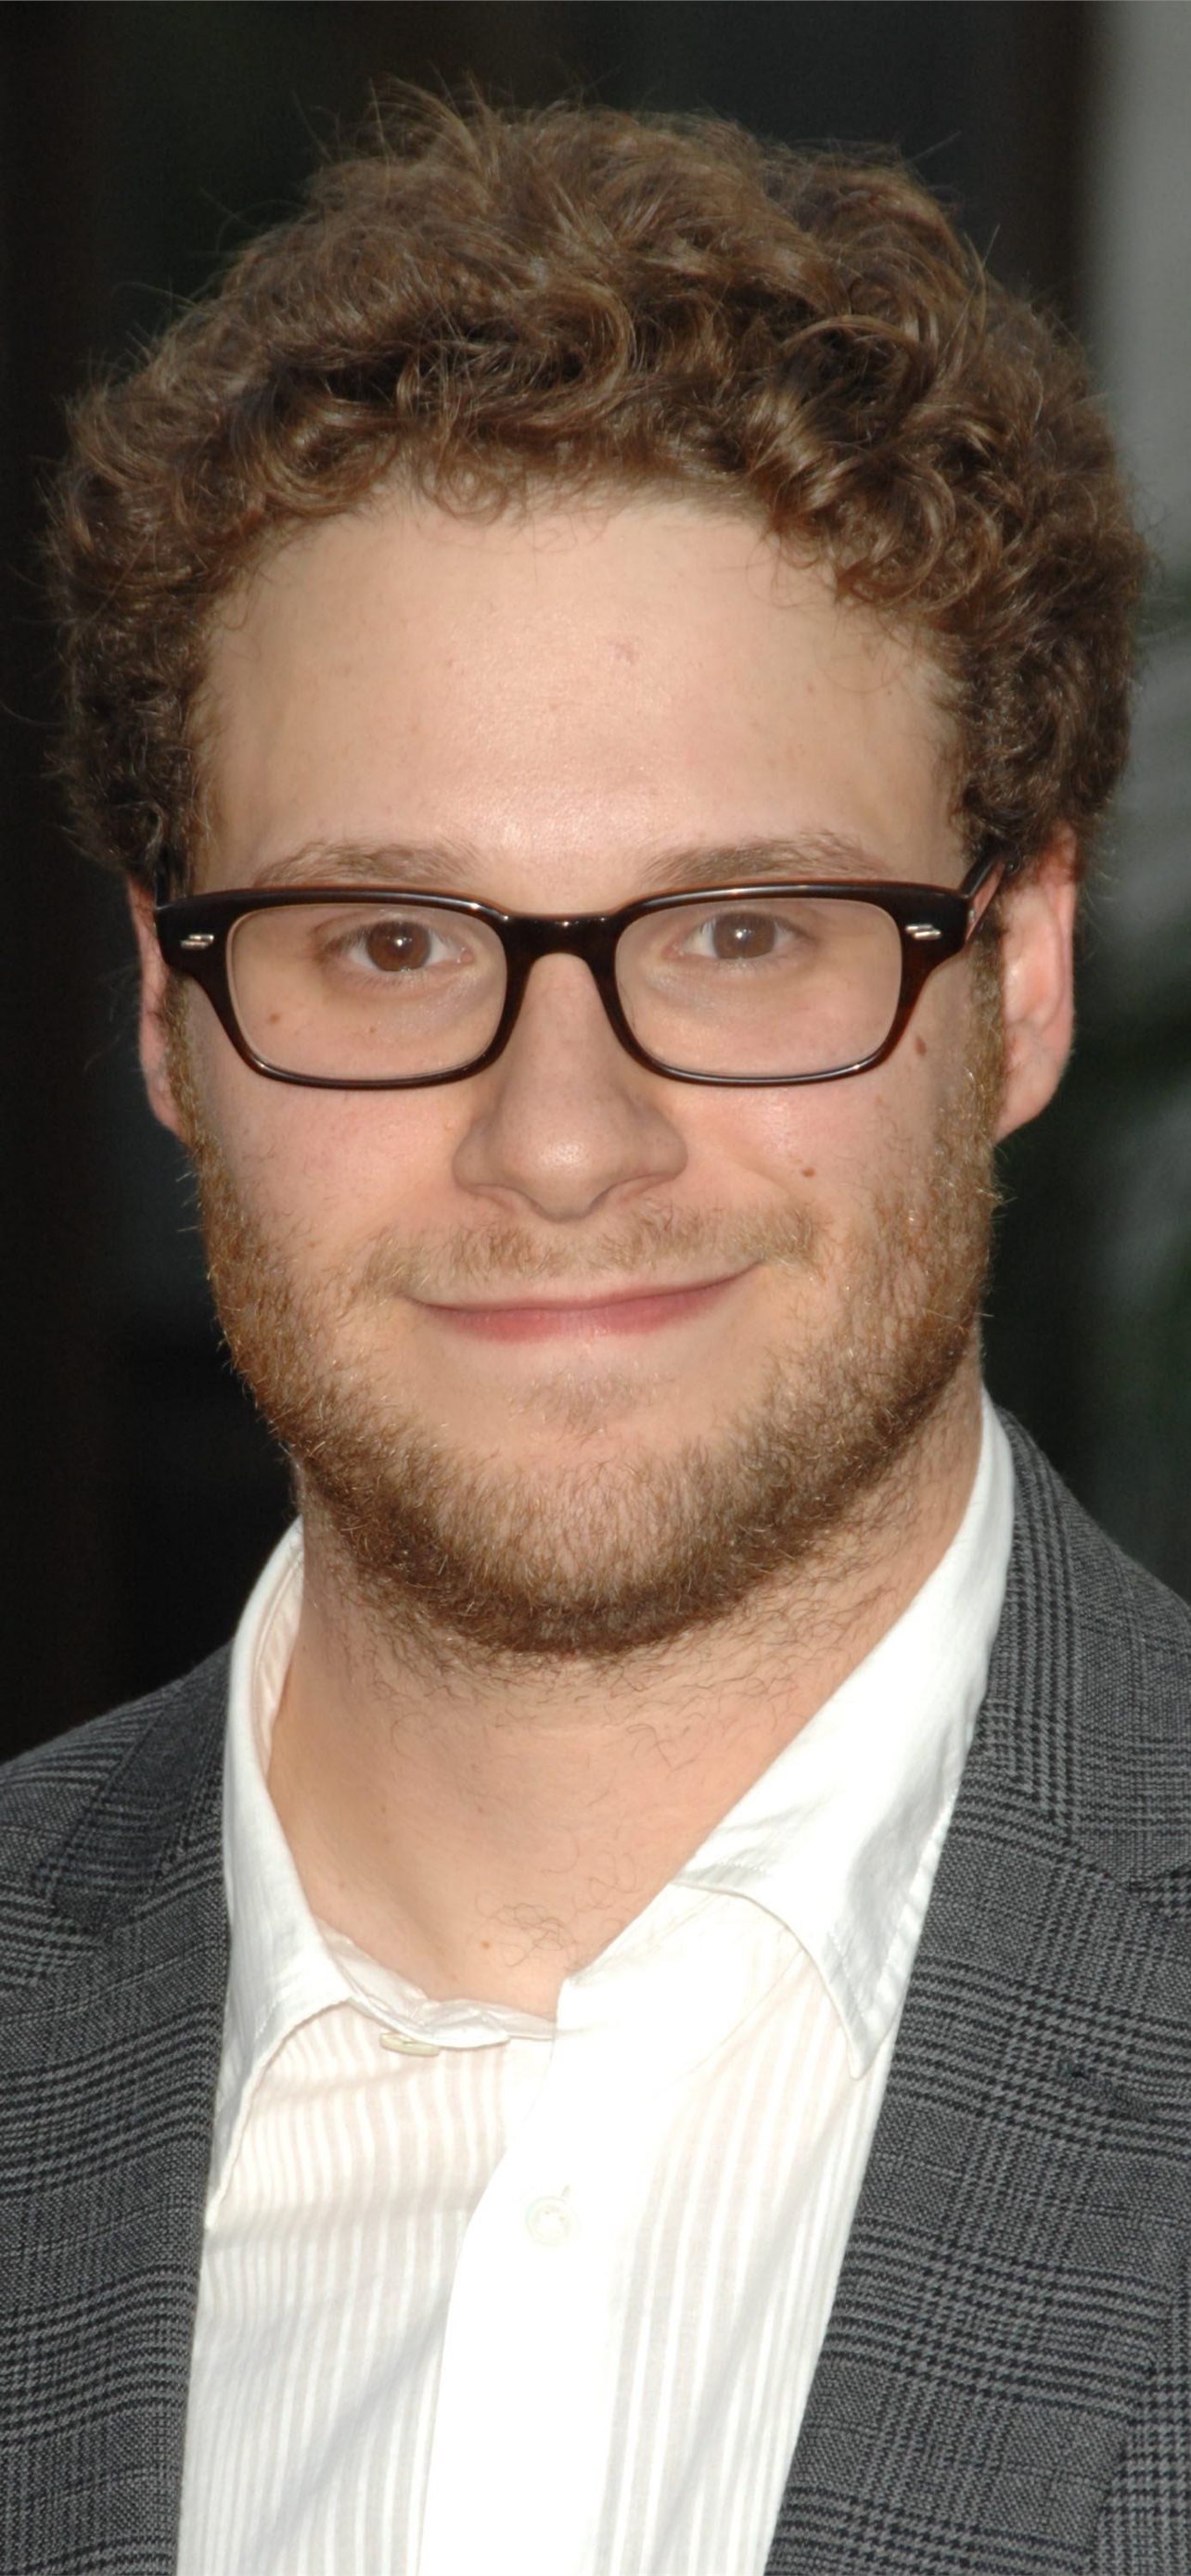 HD wallpaper, Phone Hd Seth Rogen Background Image, Best Seth Rogen Wallpapers, Iphone Backgrounds, 1290X2780 Hd Phone, High Definition Images